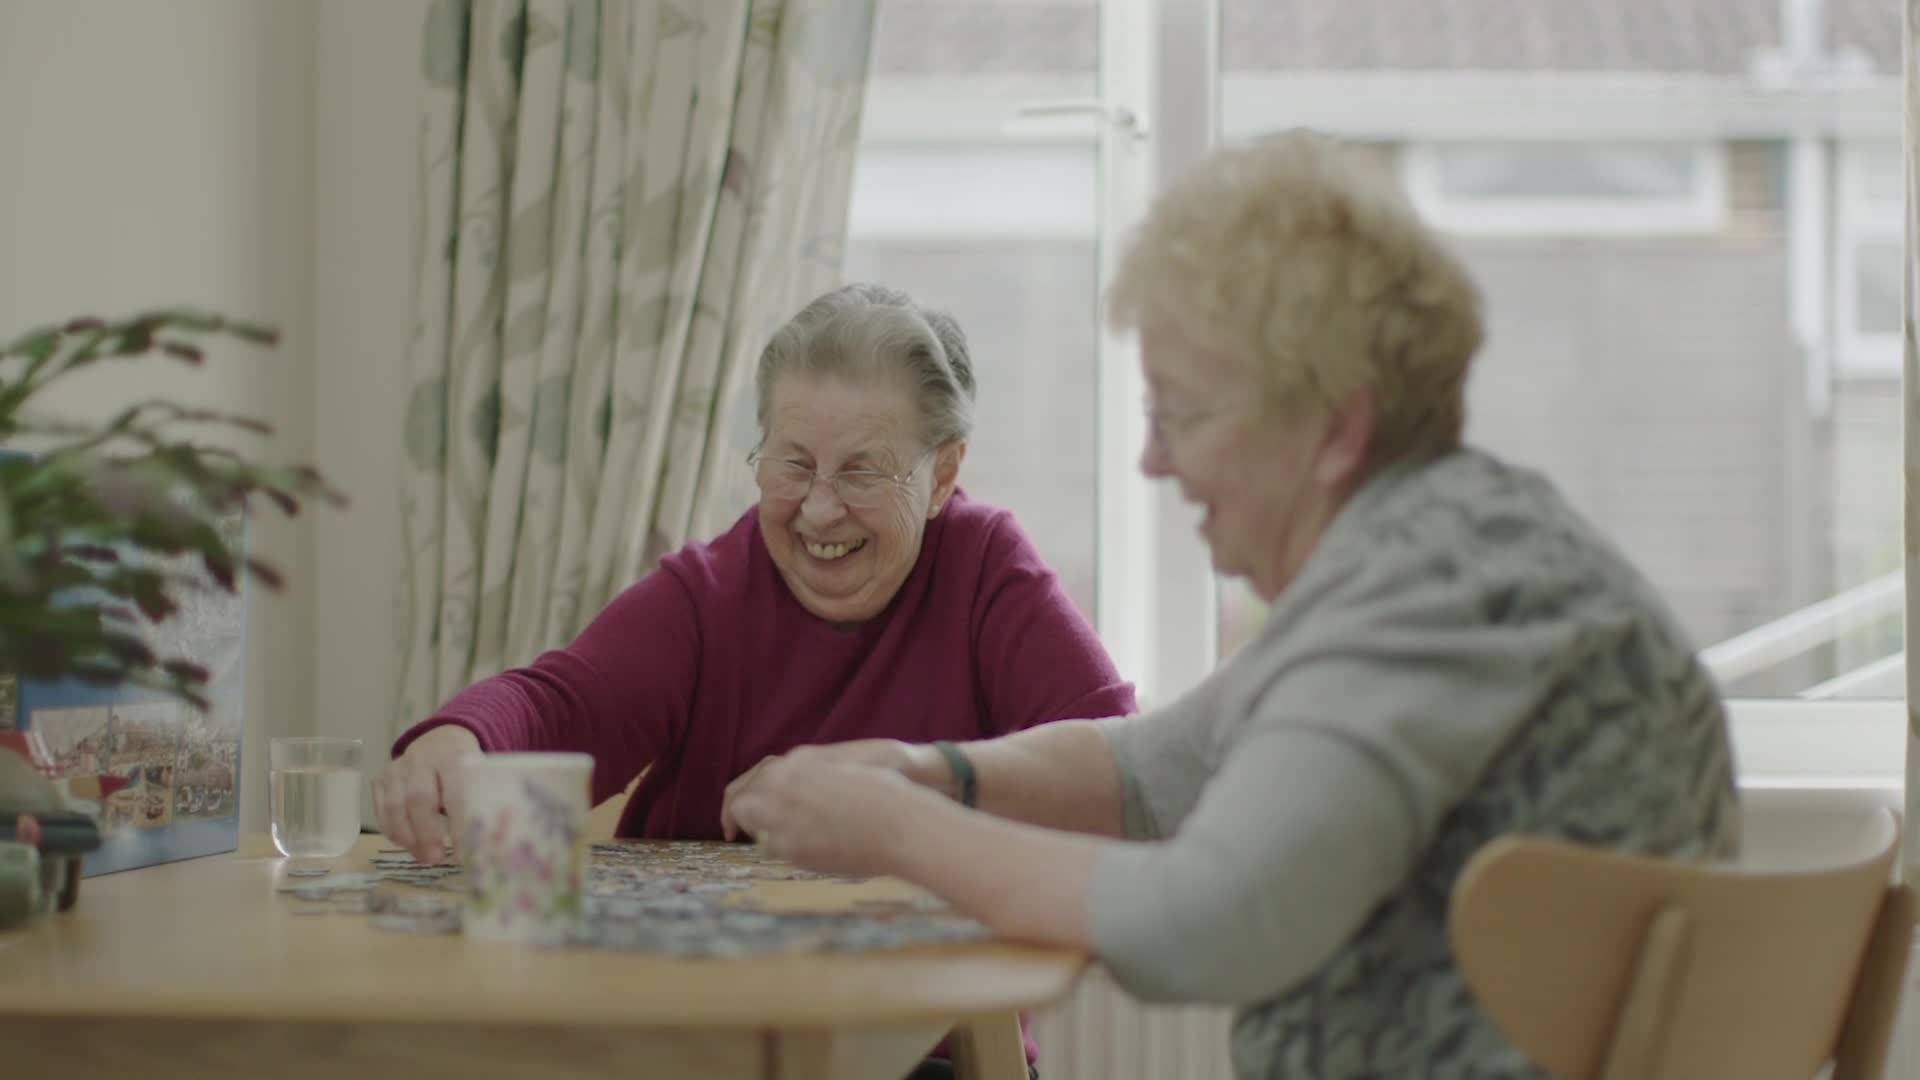 Ann and Mary sit together at a table putting together a jigsaw